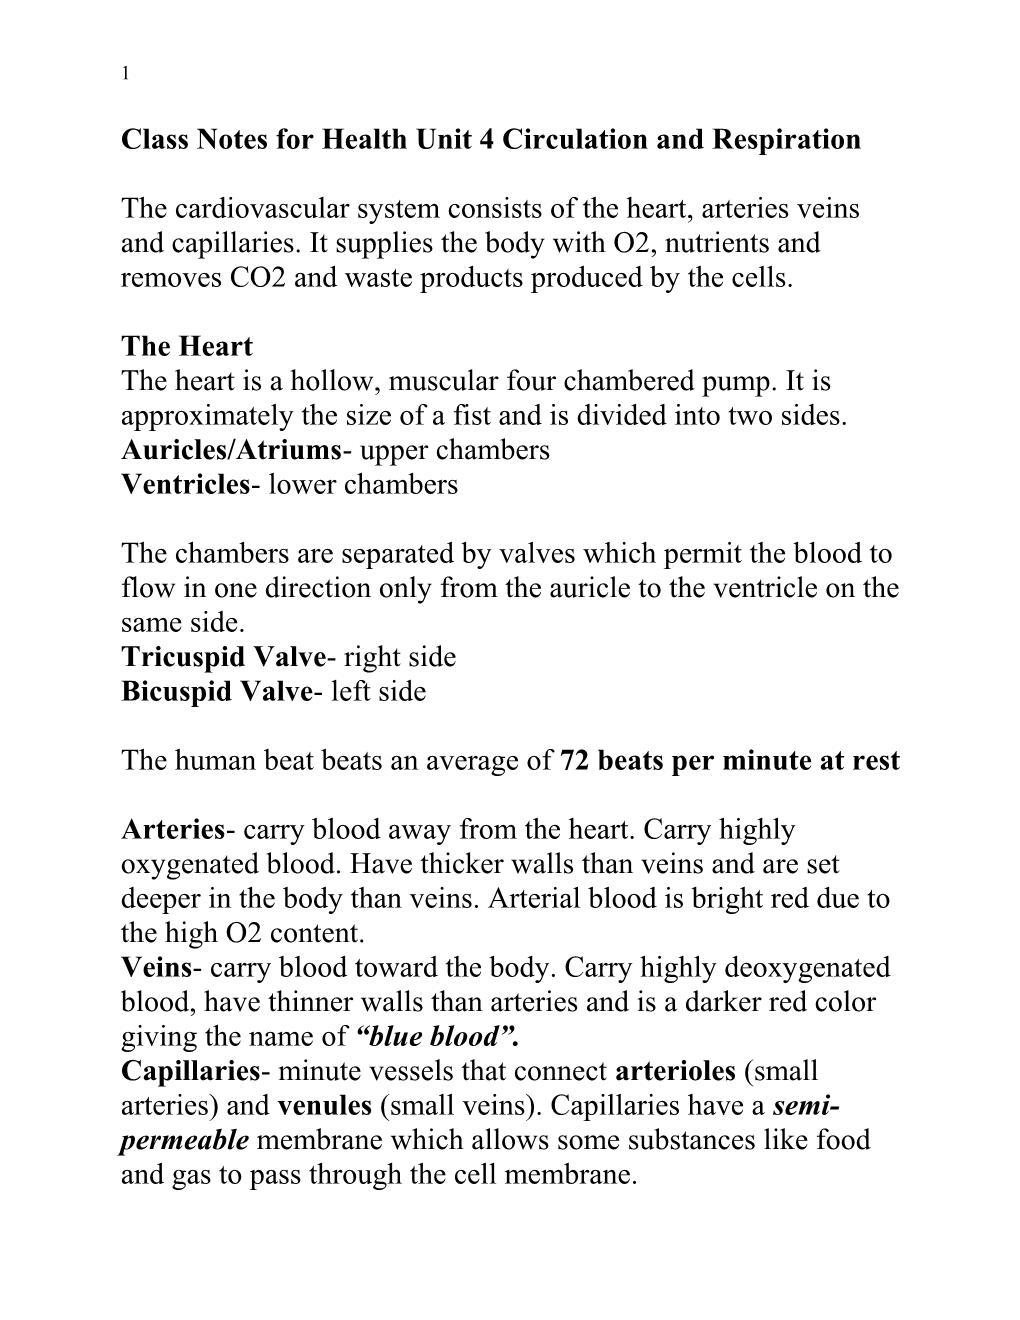 Class Notes for Health Unit 4 Circulation and Respiration